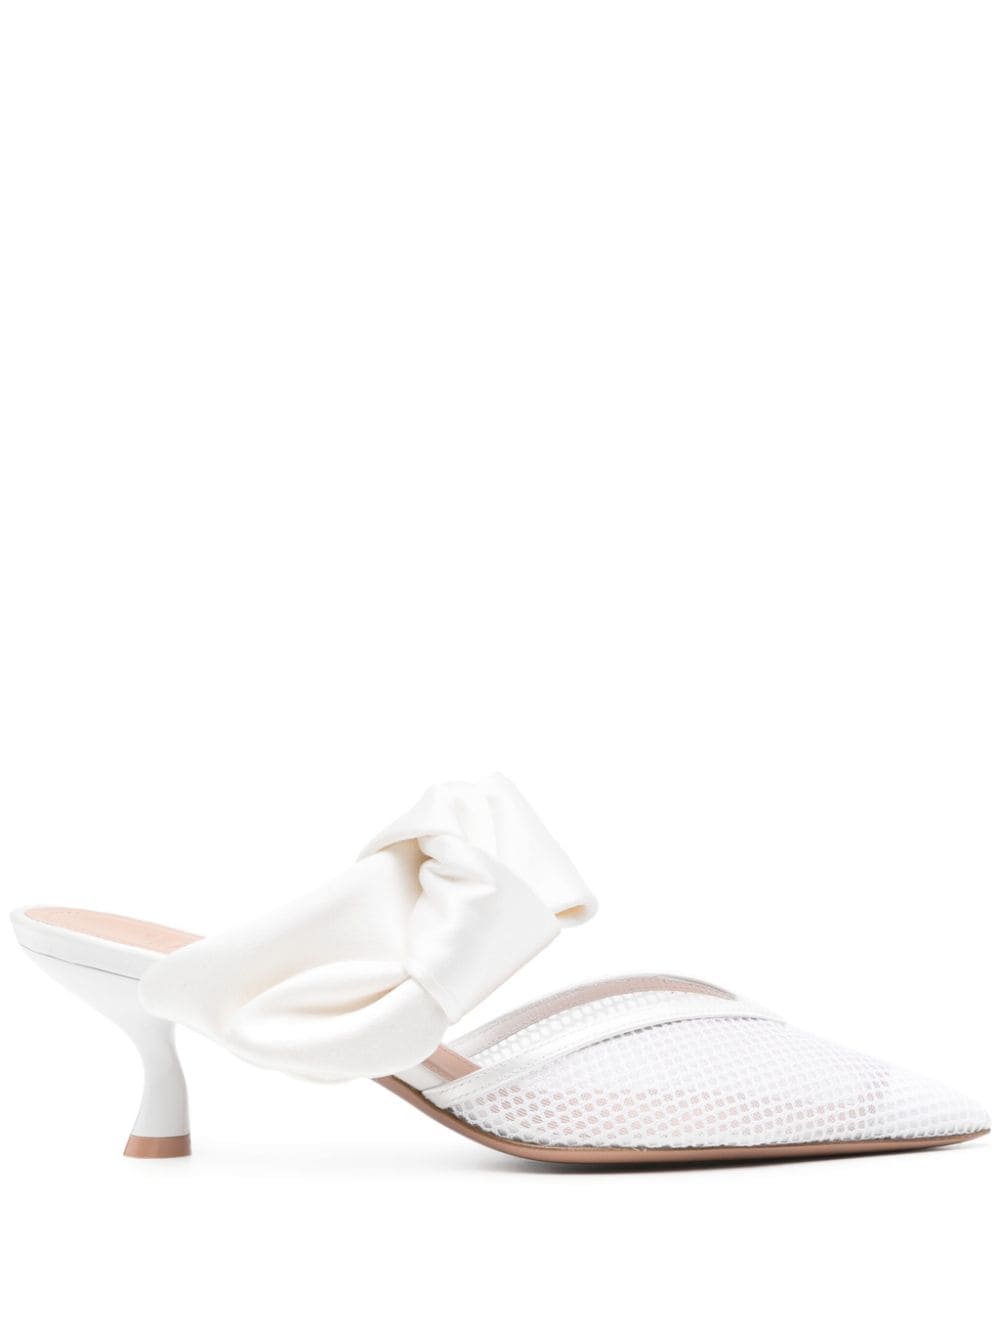 Malone Souliers Marie 45mm bow mules - White von Malone Souliers